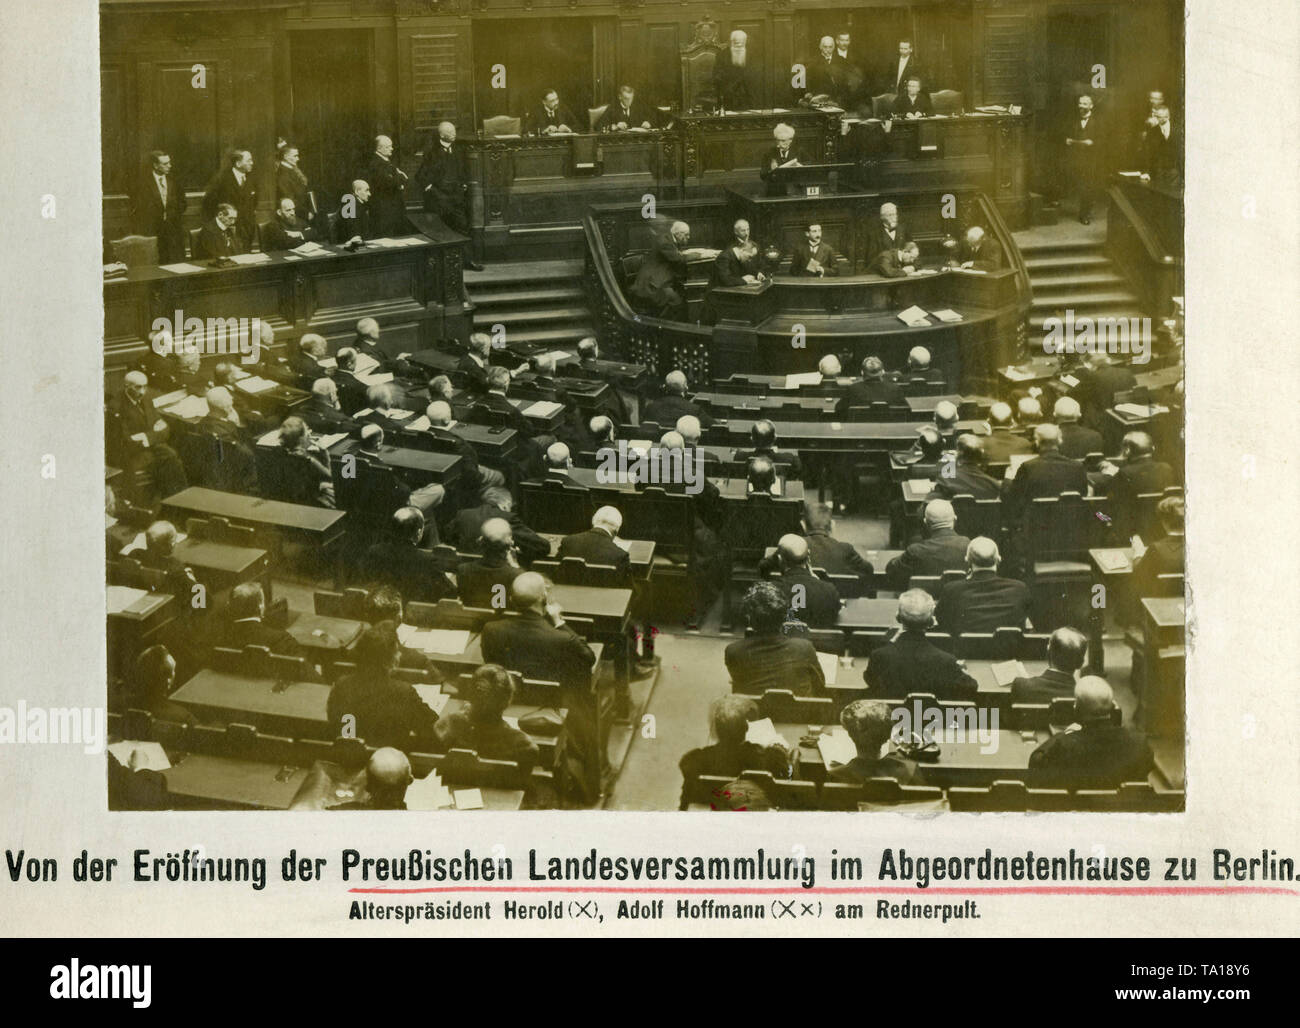 Opening of the Prussian National Assembly in the House of Representatives in Berlin. At the lectern Adolf Hoffmann, behind him, president by seniority Carl Herold. Stock Photo